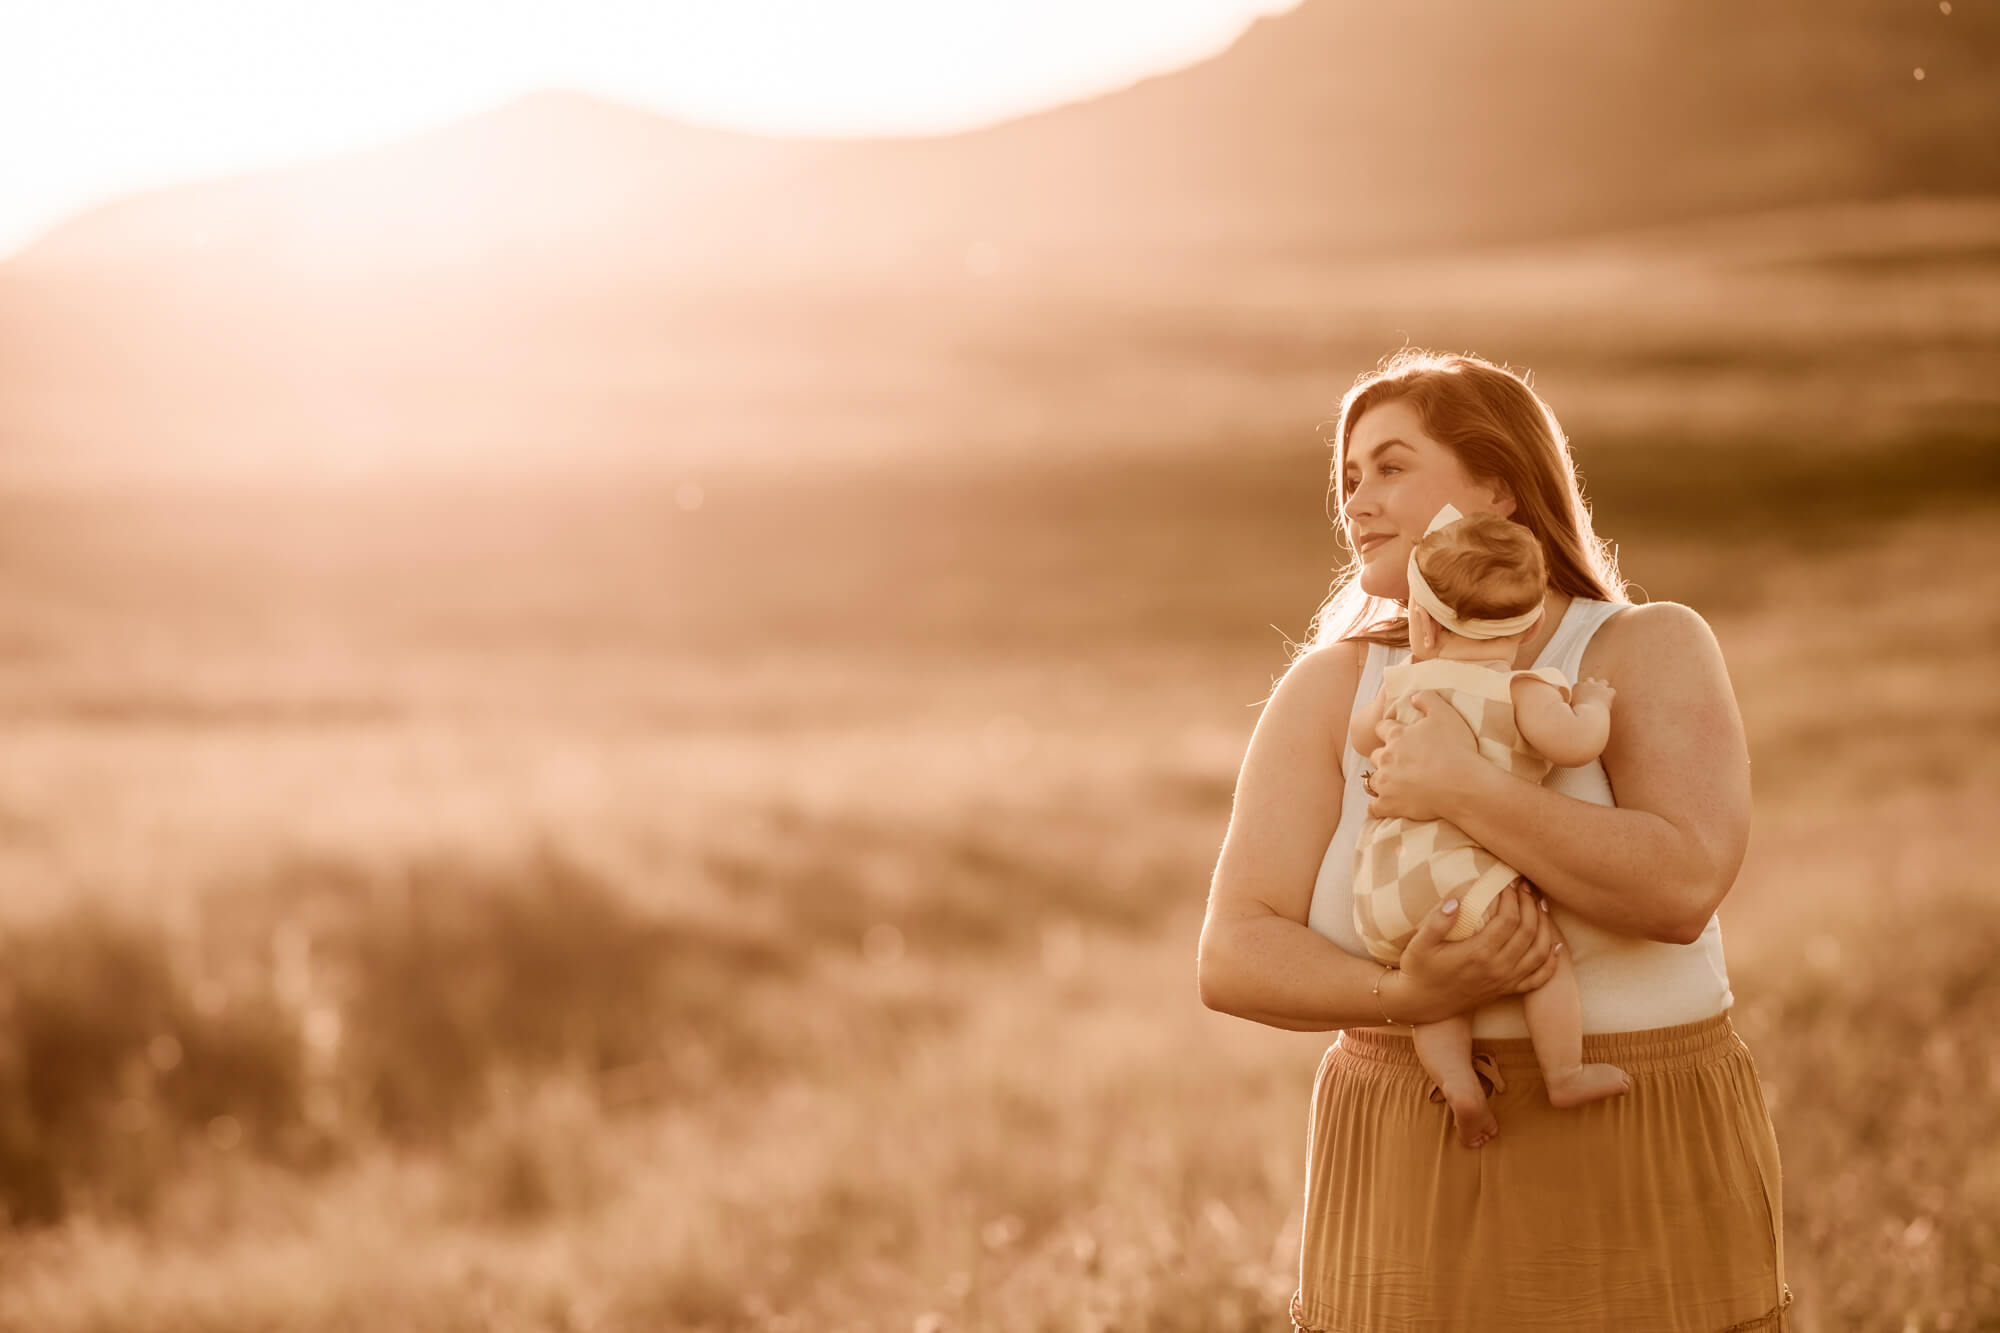 Mother holds her daughter near mountains in a field.